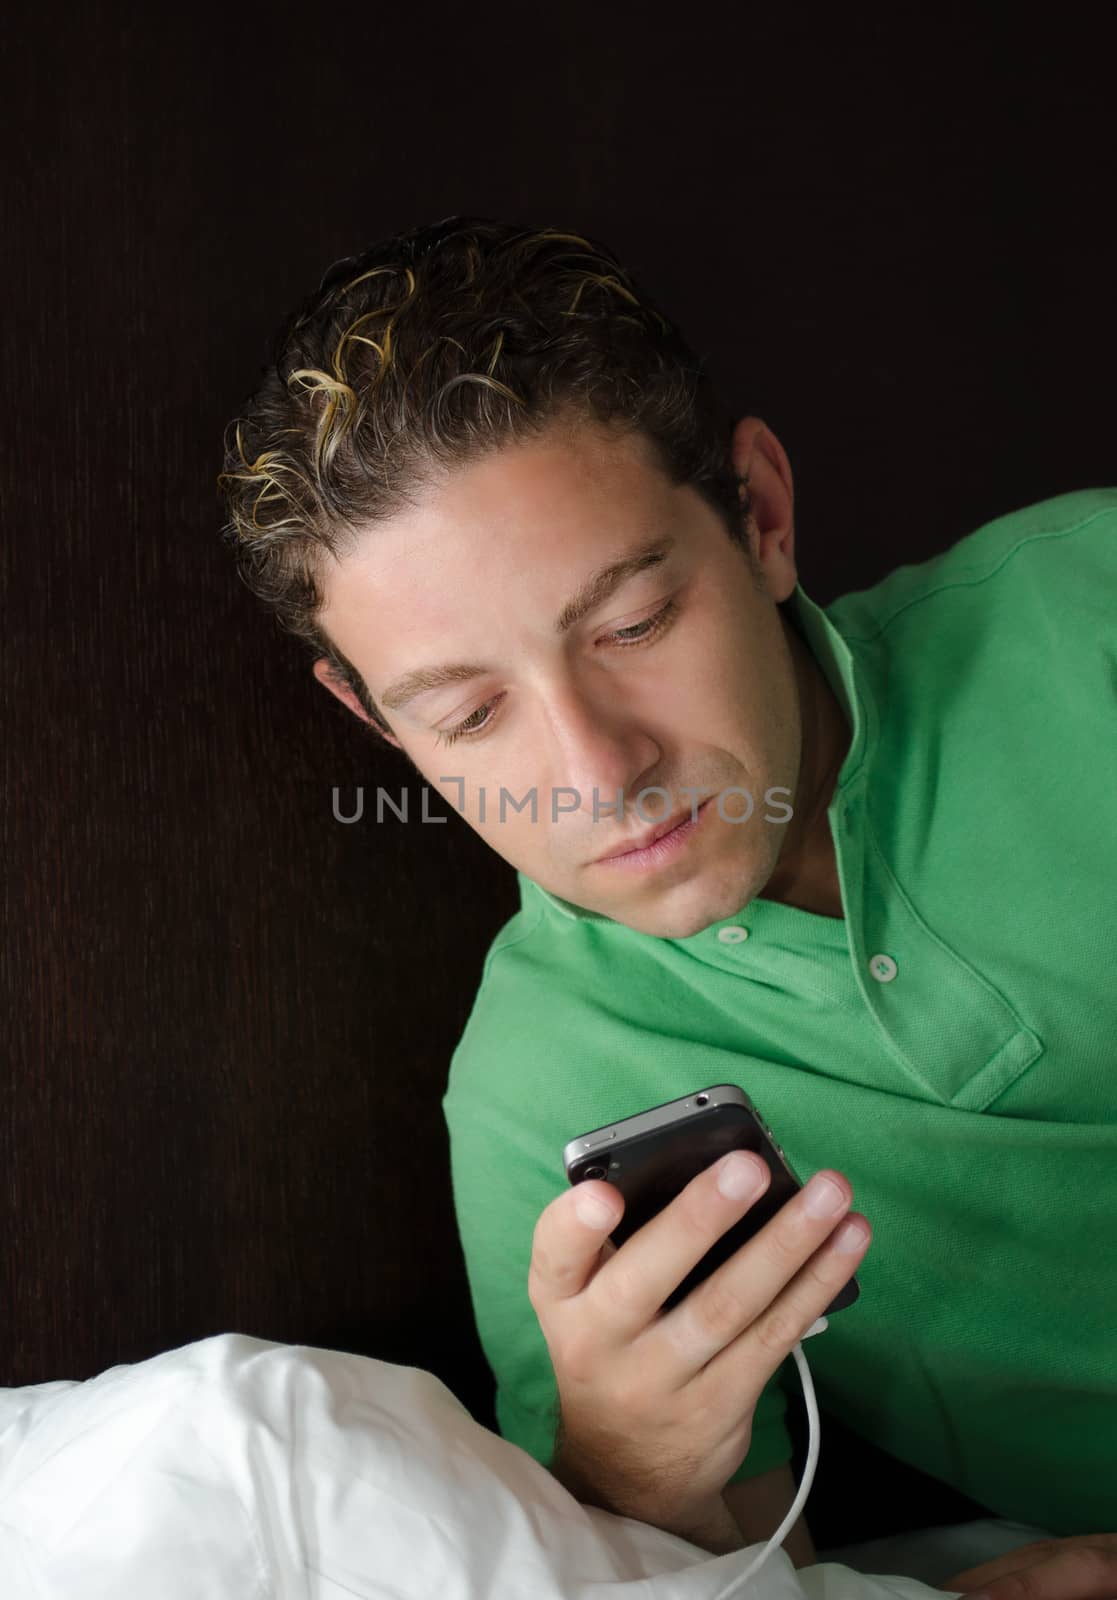 Handsome young man looking at or reading cell phone screen at night in bed